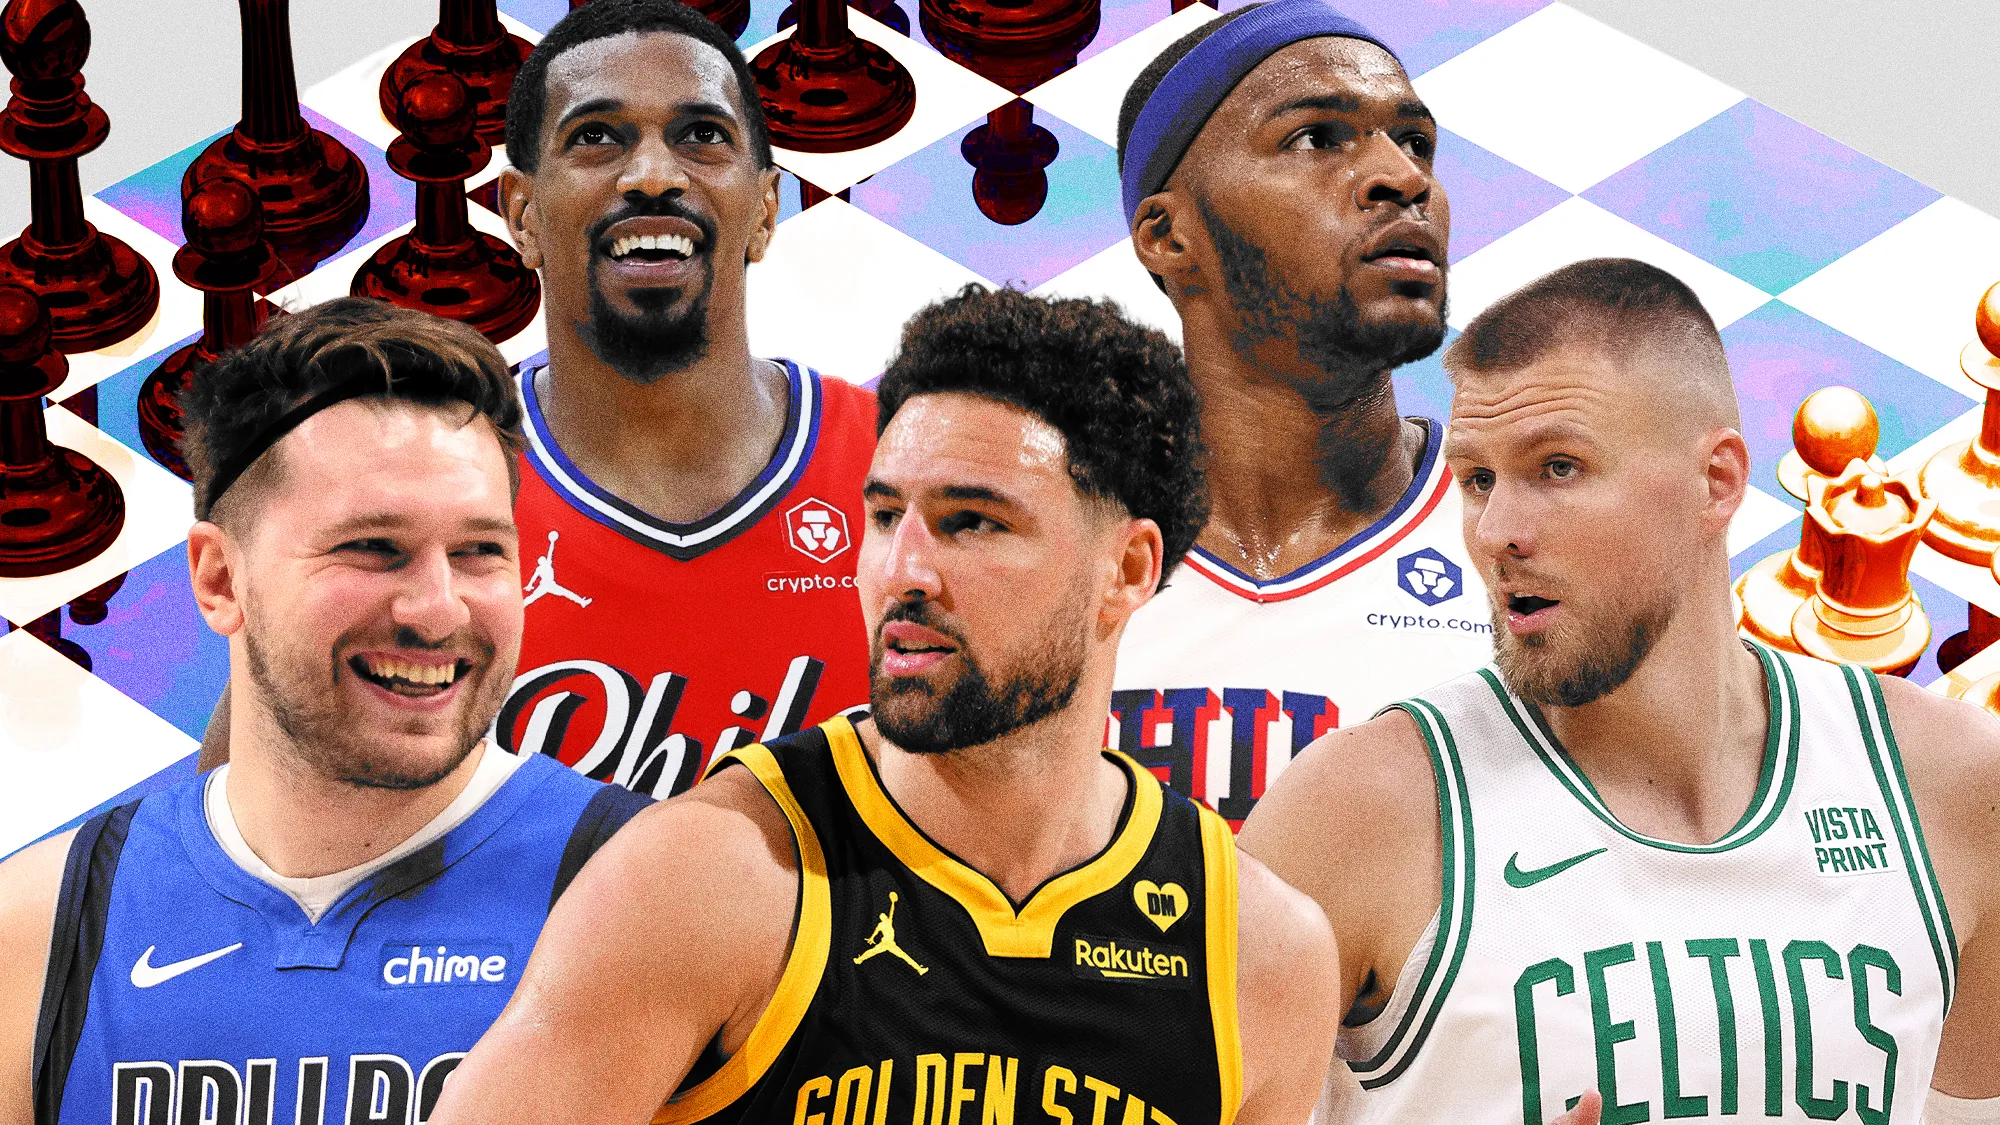 Breaking Down the Big Moves: How This Week's NBA Trades Could Change the Game for Top Teams